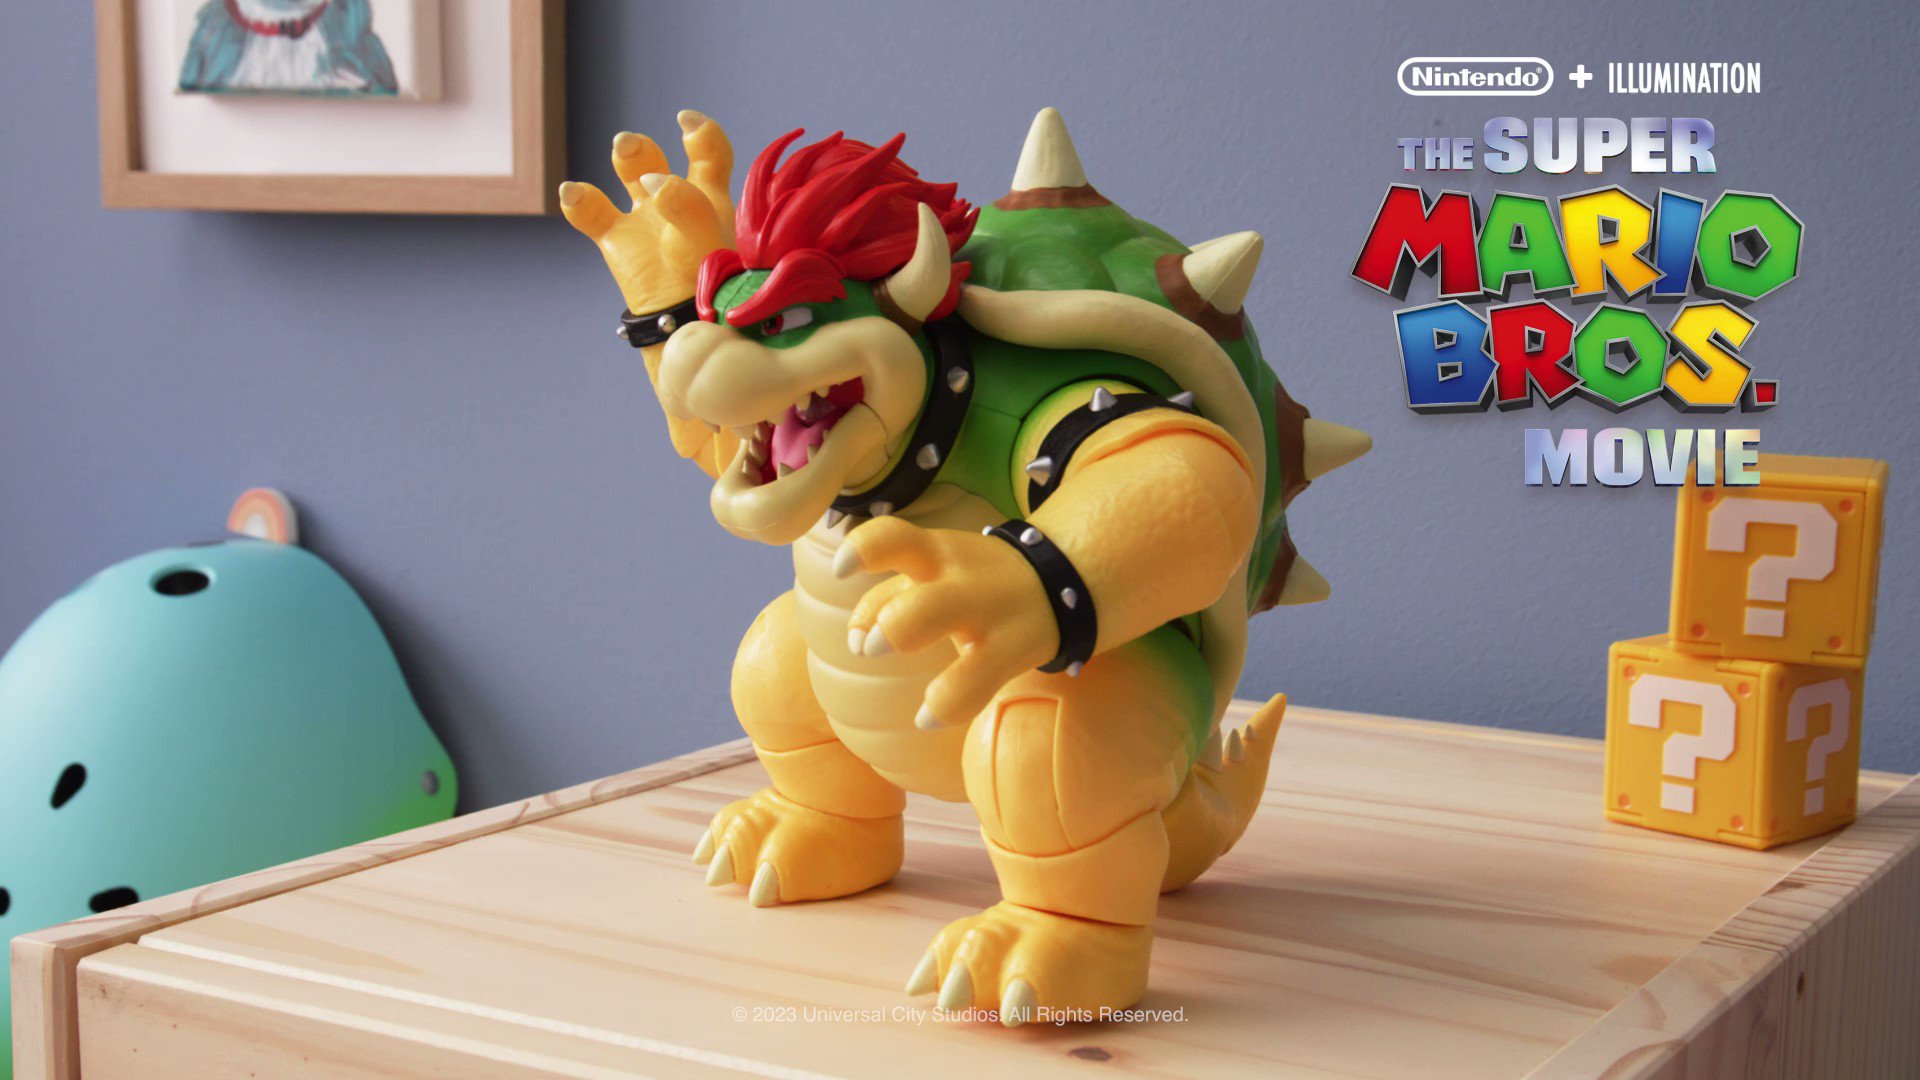 The Super Mario Bros. Movie – 7” Feature Bowser with Fire Breathing Effects